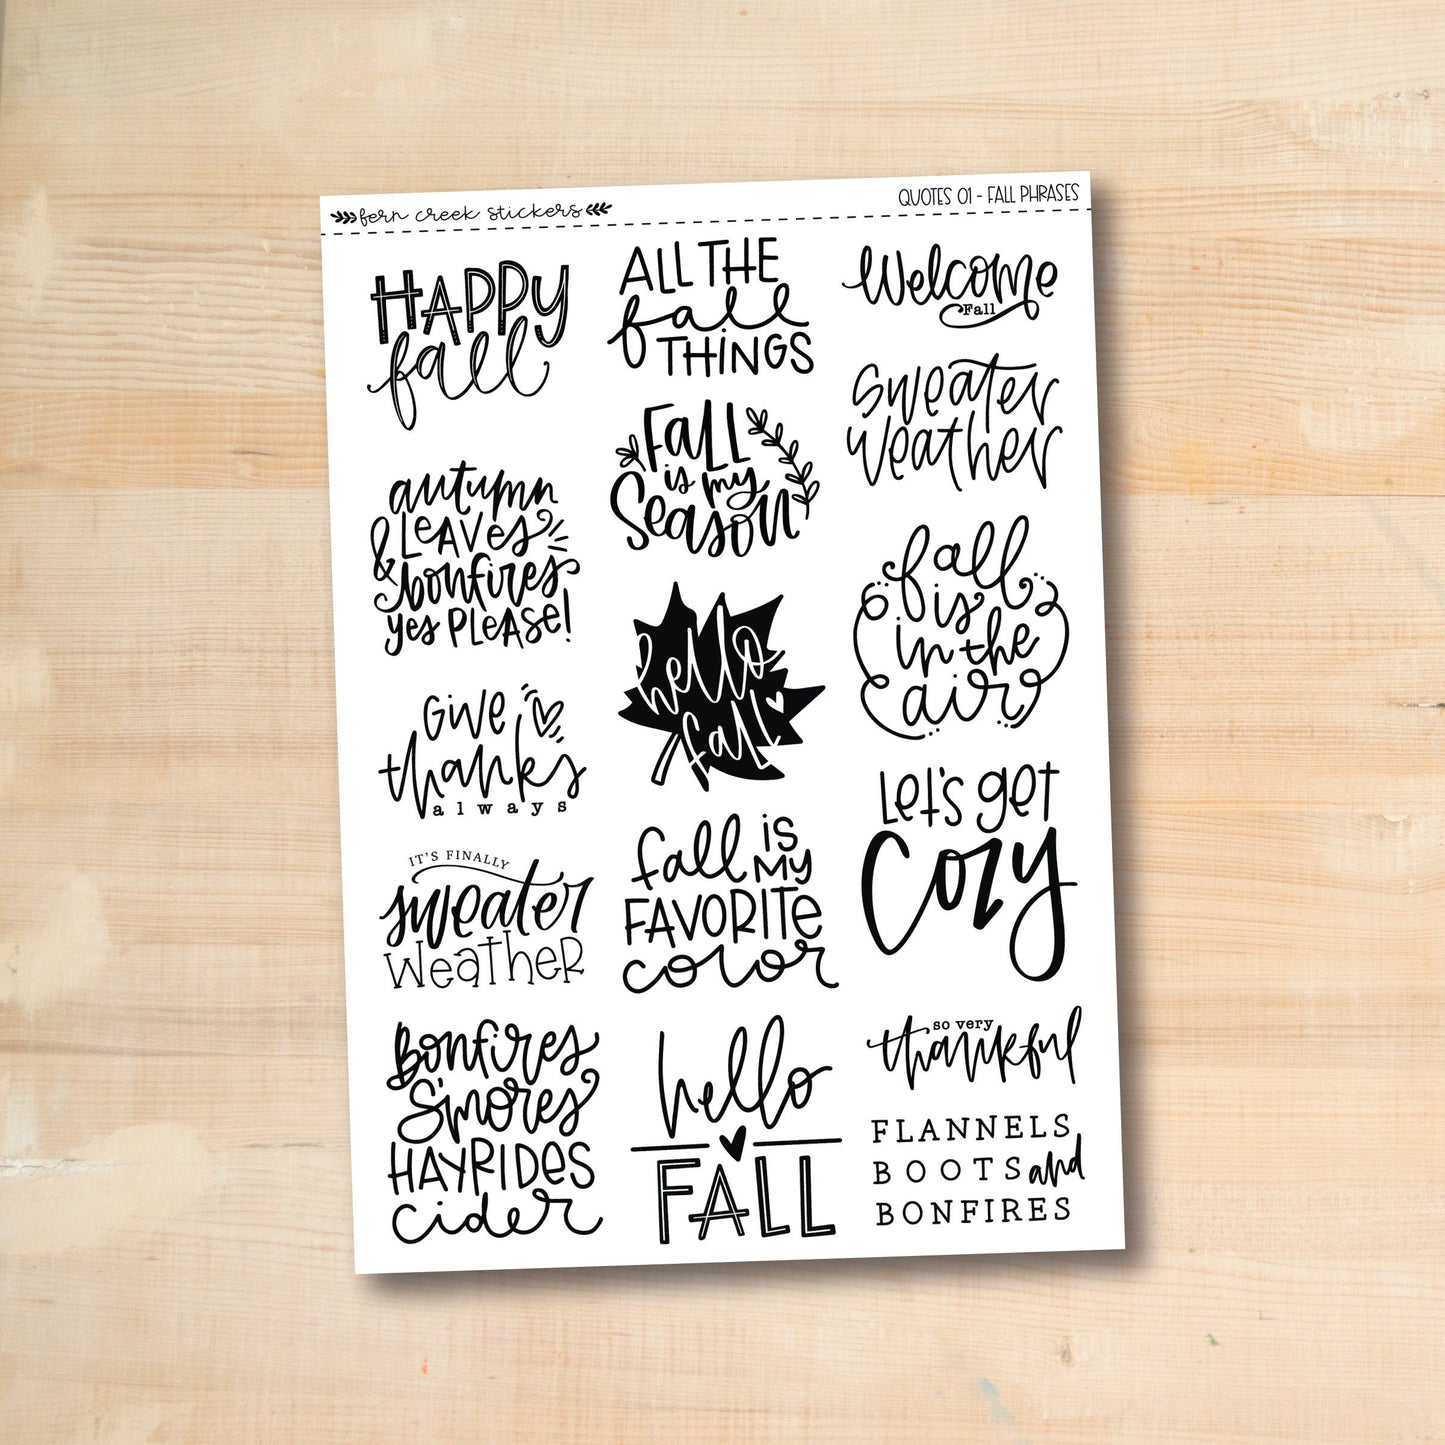 QUOTES-01 || Fall phrases quote stickers